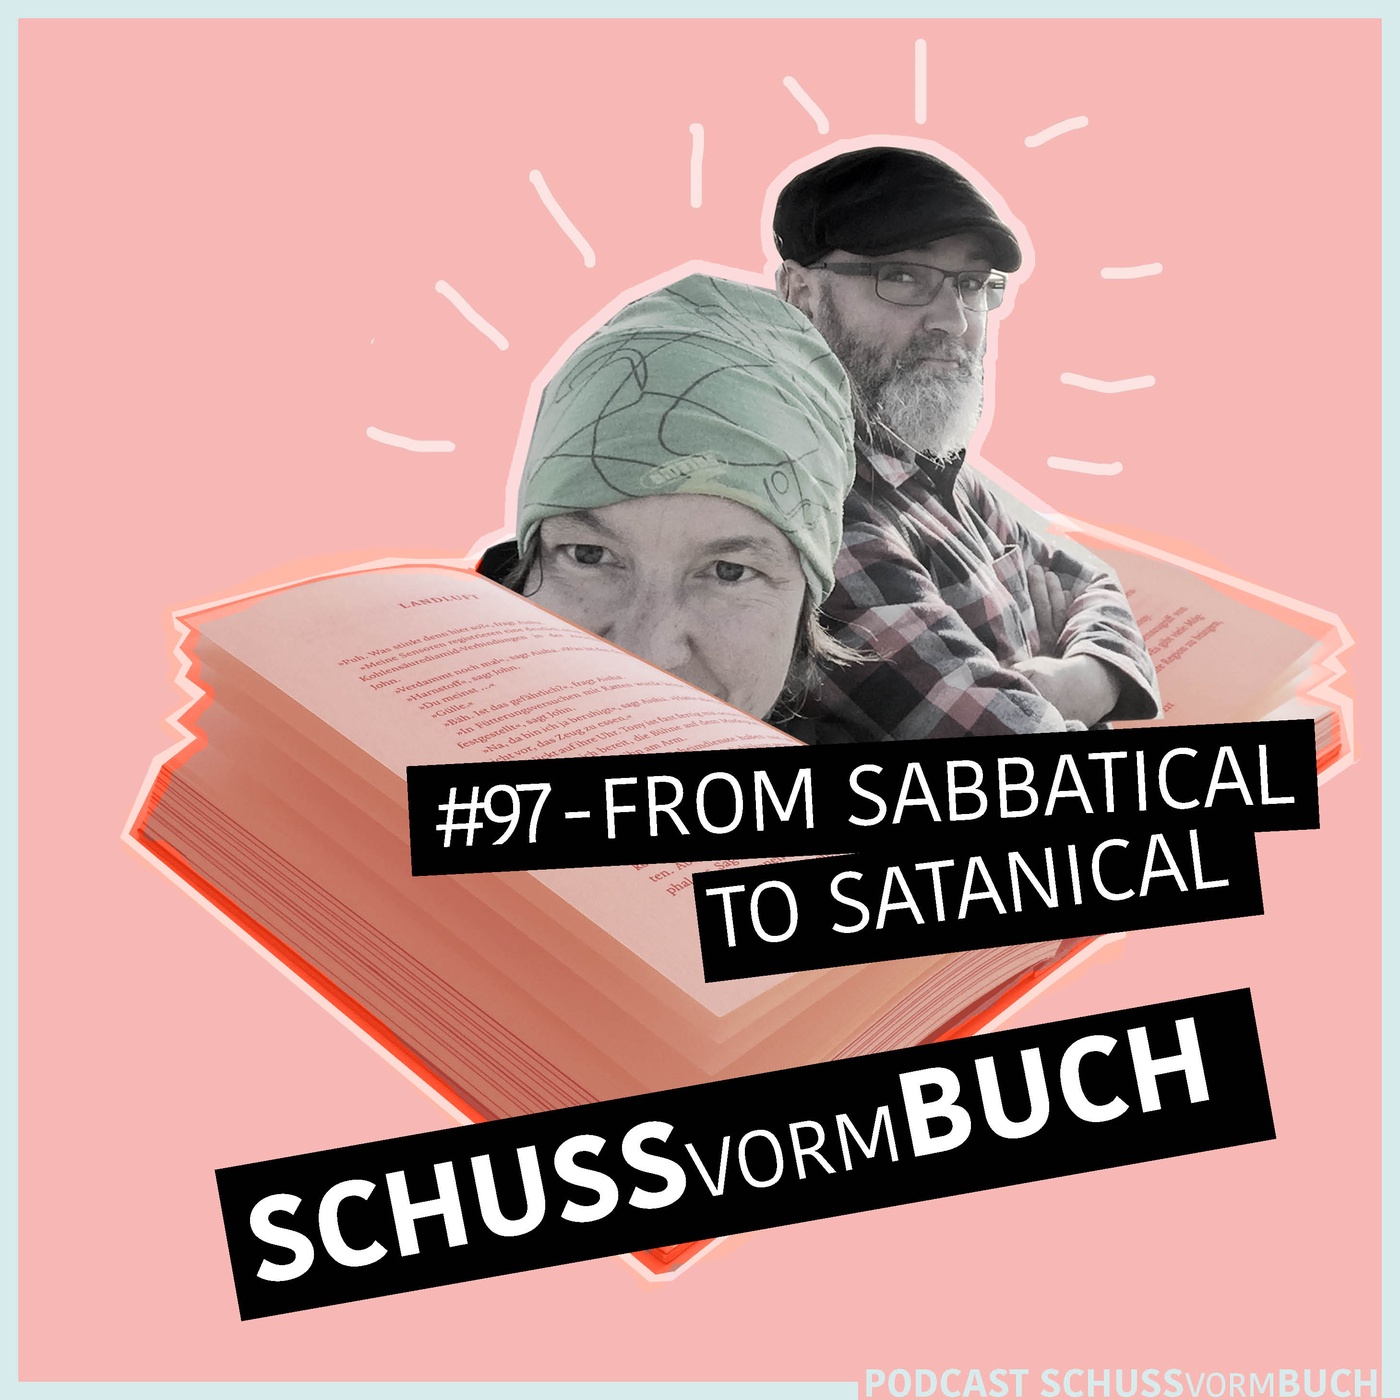 #97 - From Sabbatical to Satanical